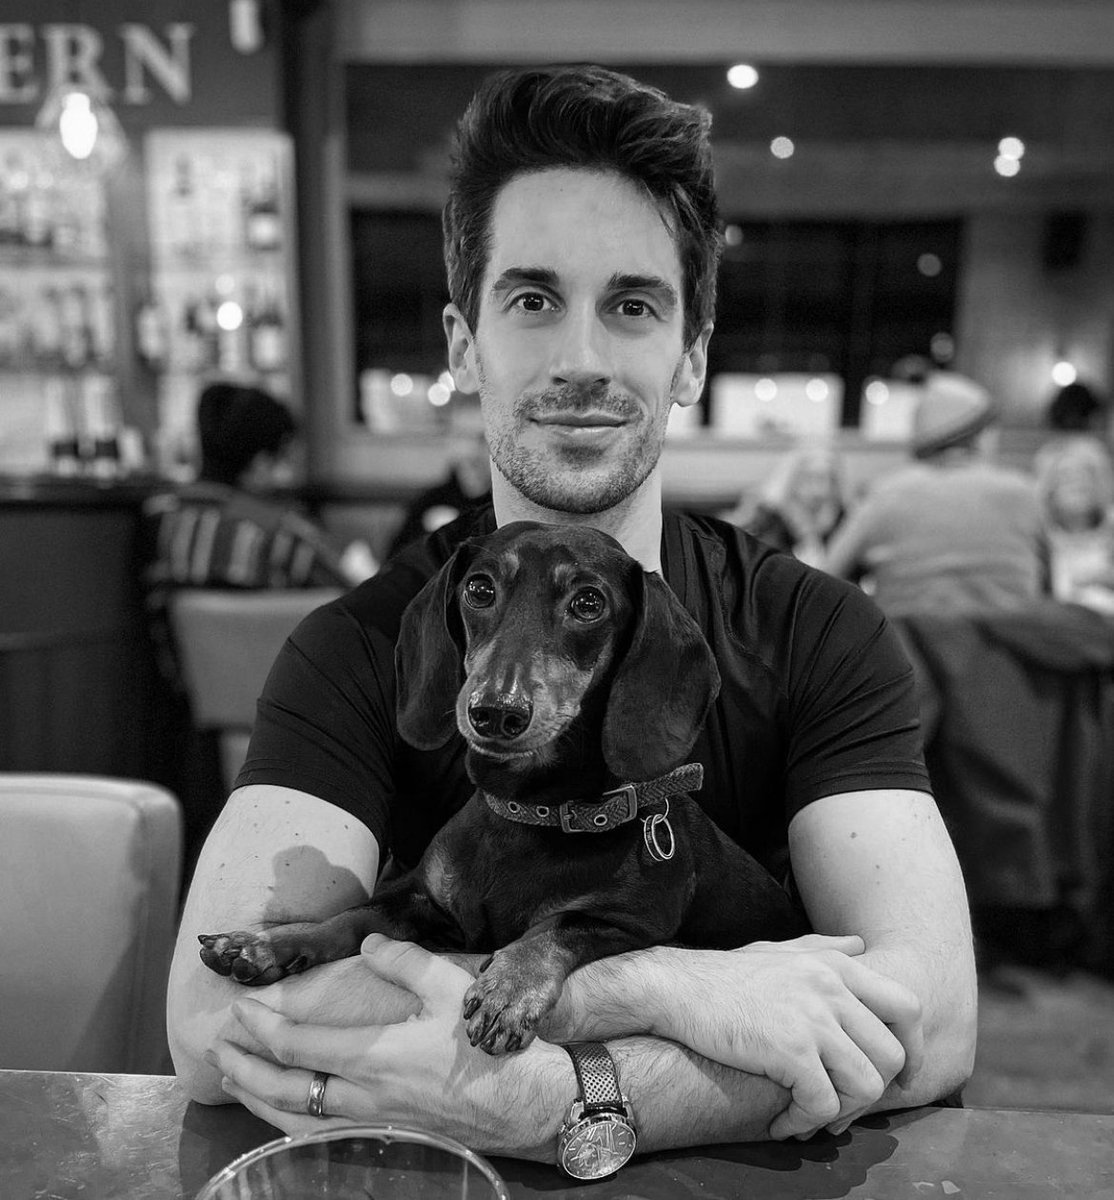 Fridays are made for quality time with your doggie and drinks at the Greenwich Tavern 😉 Many thanks to @macnicolaides for the lovely photo!